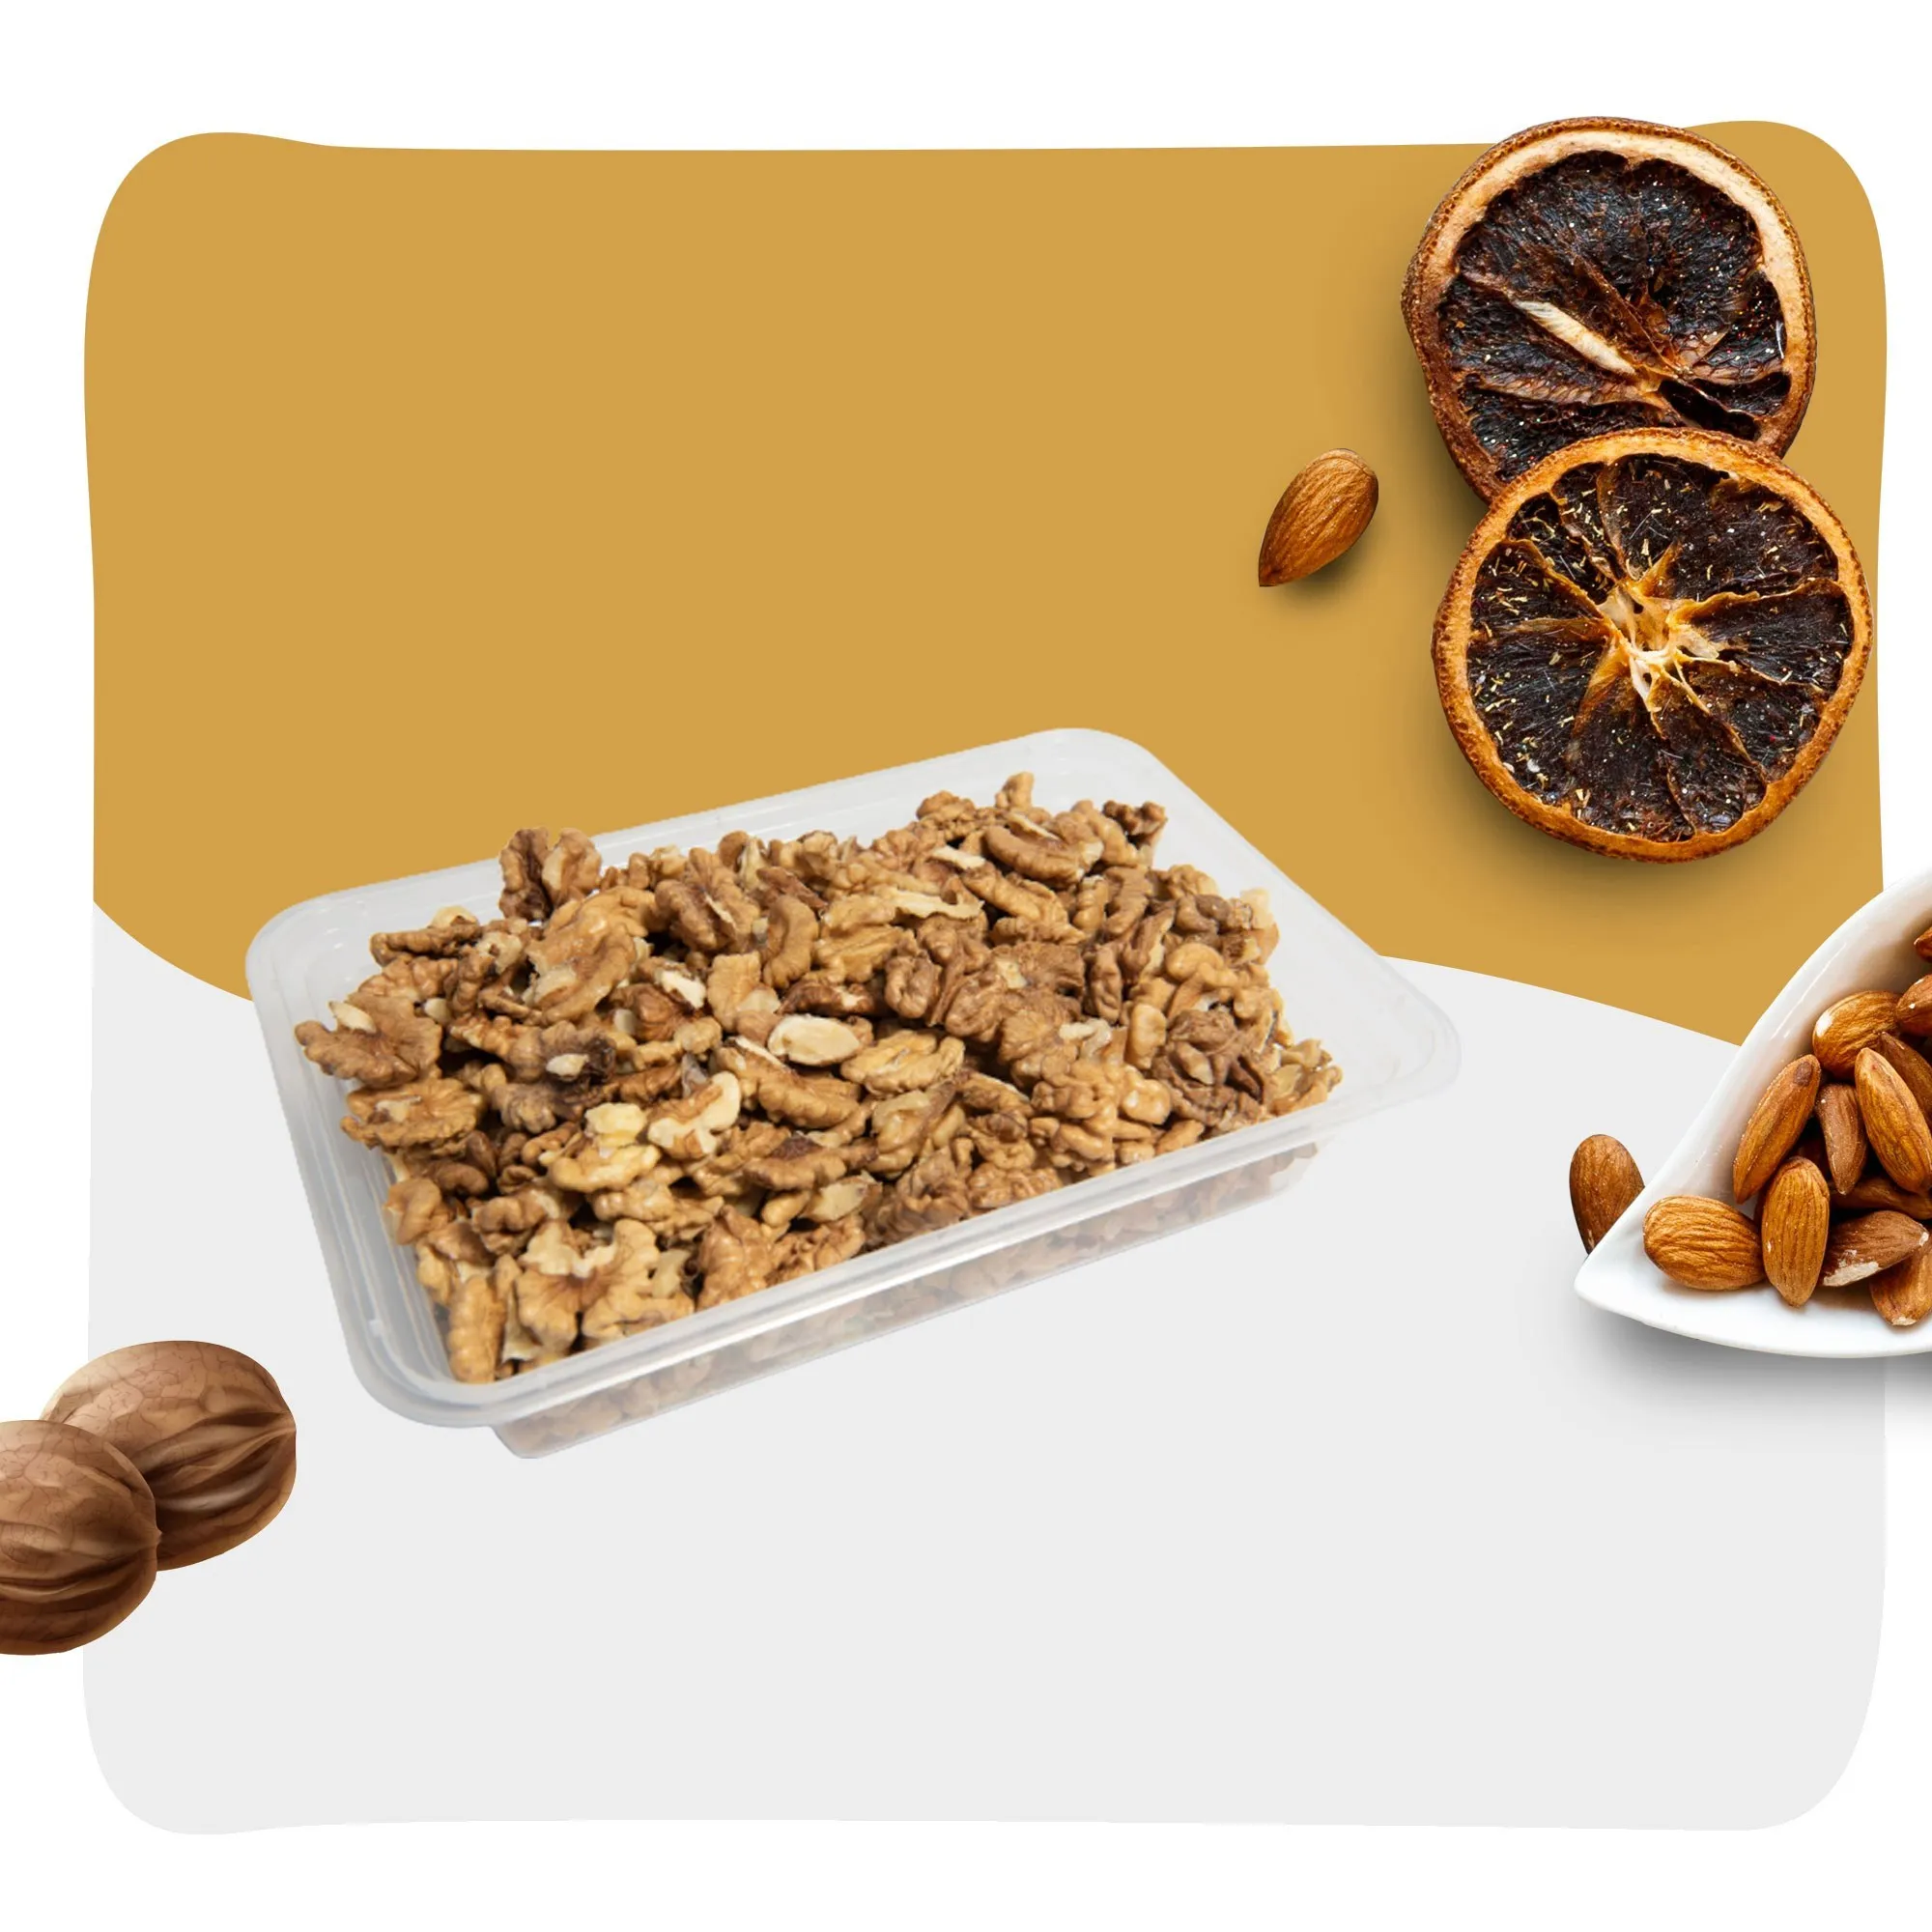 The purchase price of lightly salted walnuts + training